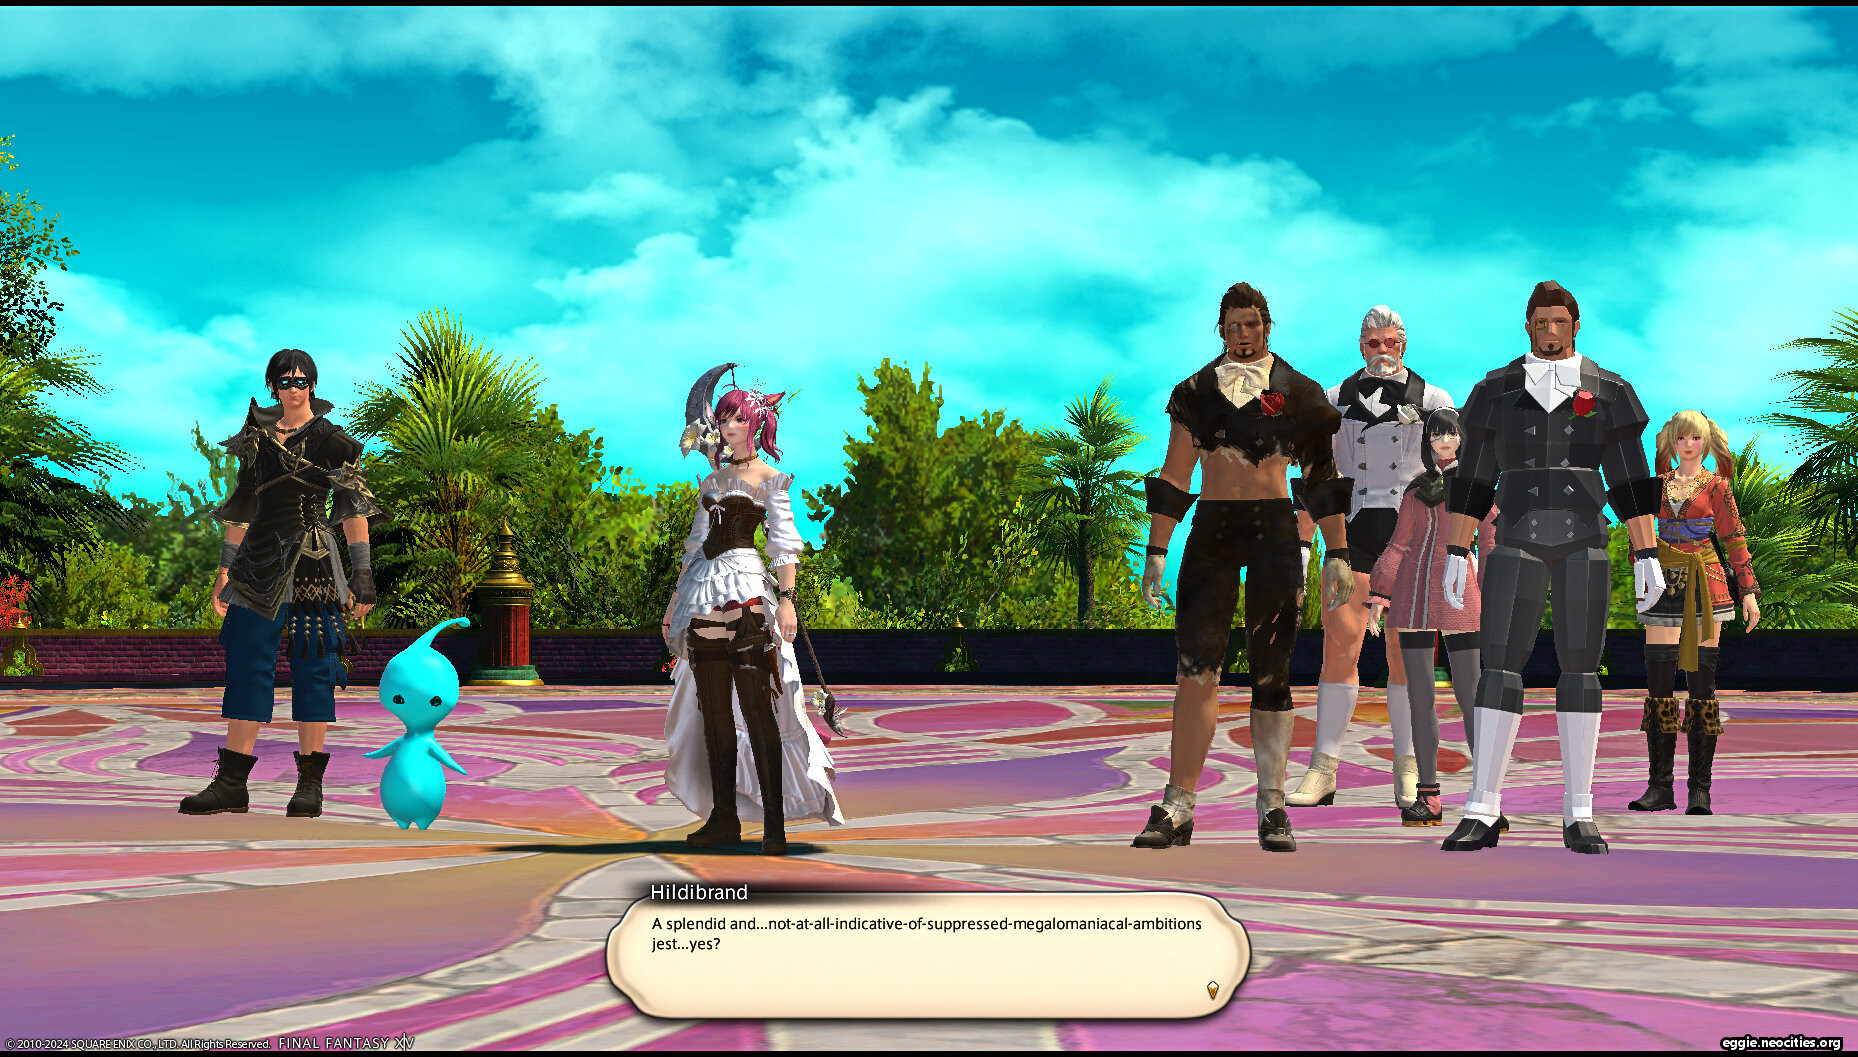 A screenshot featuring, from left to right, Delion, Pupu, Zel, Hildibrand, Godbert, Nashu, Brandihild, and Julyan. Hildibrand's dialogue box reads: A splendid and...not at all indicative of suppressed megalomaniacal ambitions just...yes?